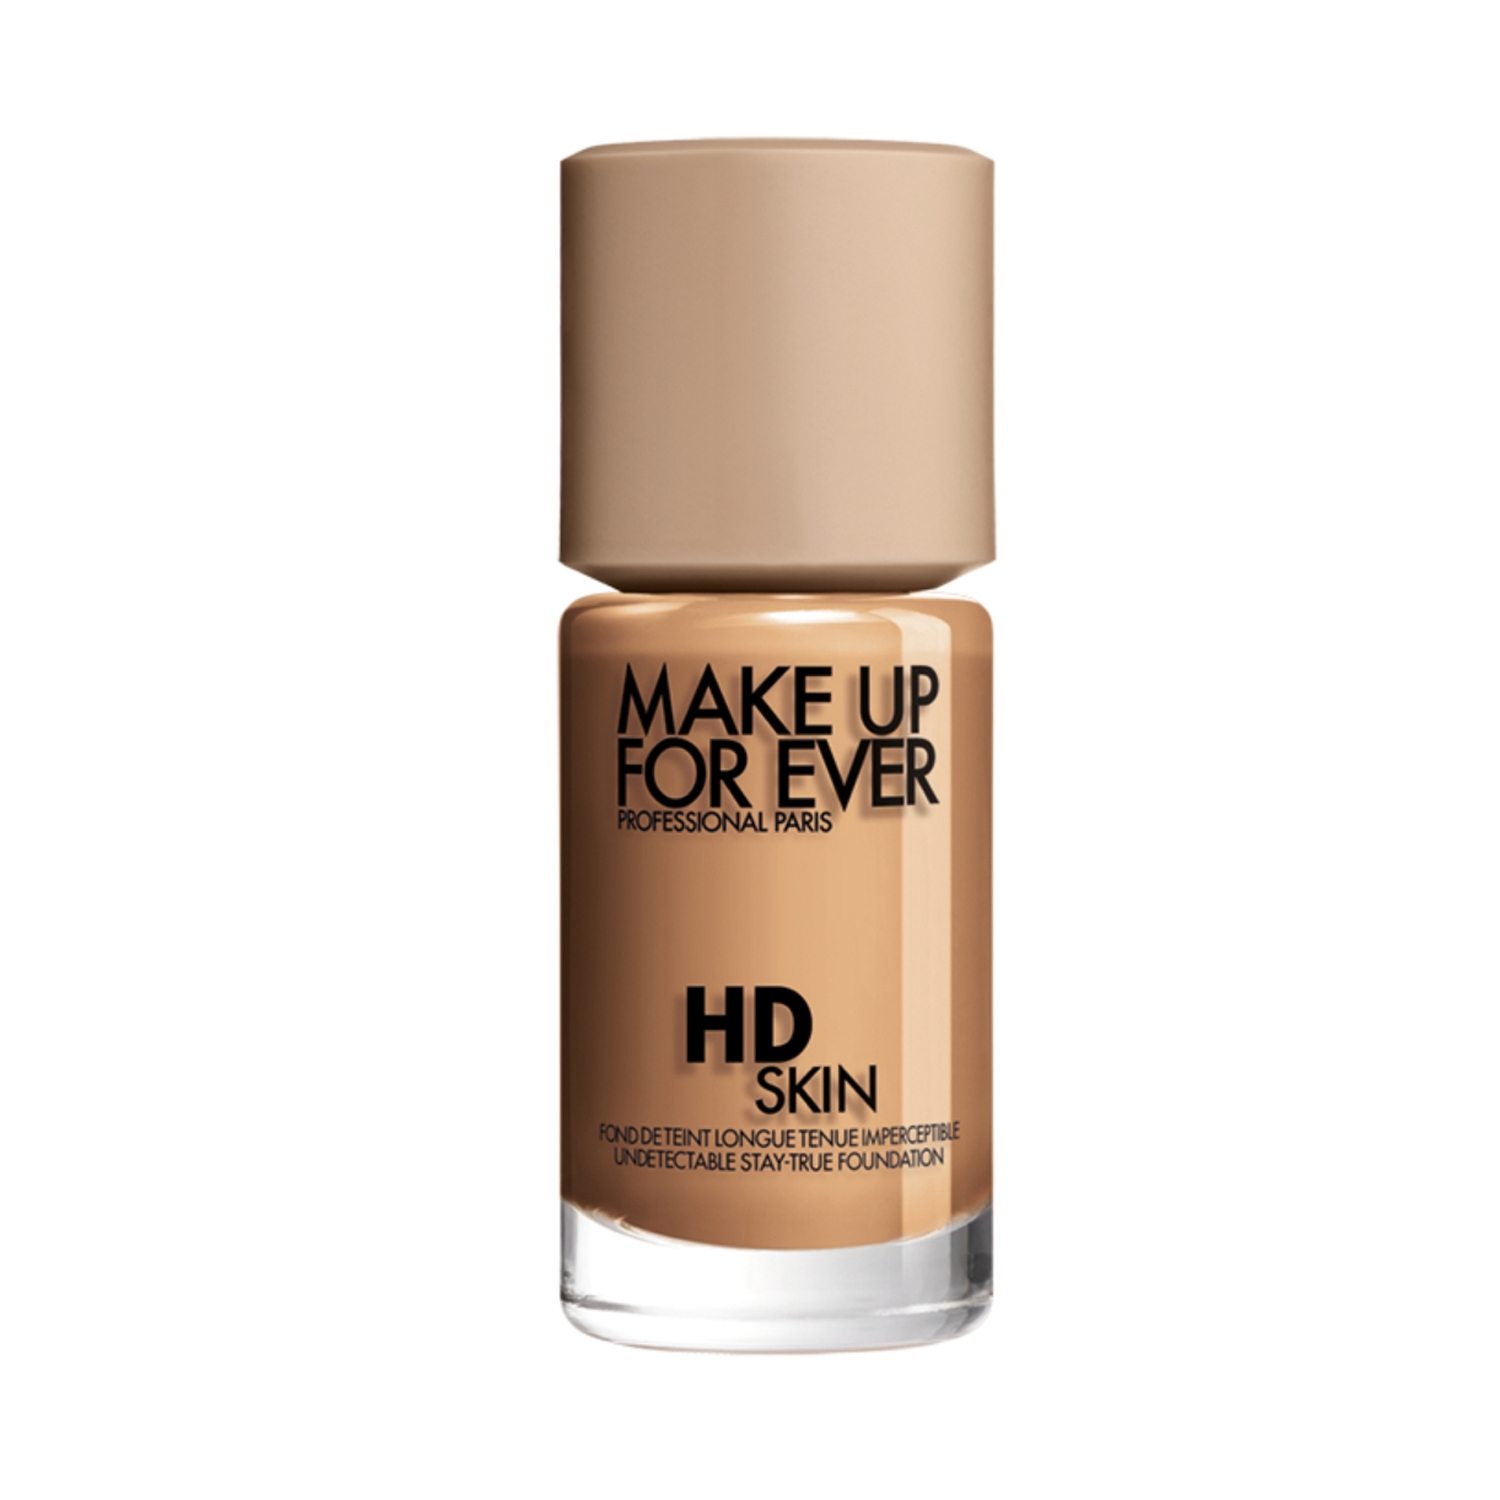 Make Up For Ever | Make Up For Ever Hd Skin Foundation-3Y40 (Y405) (30ml)